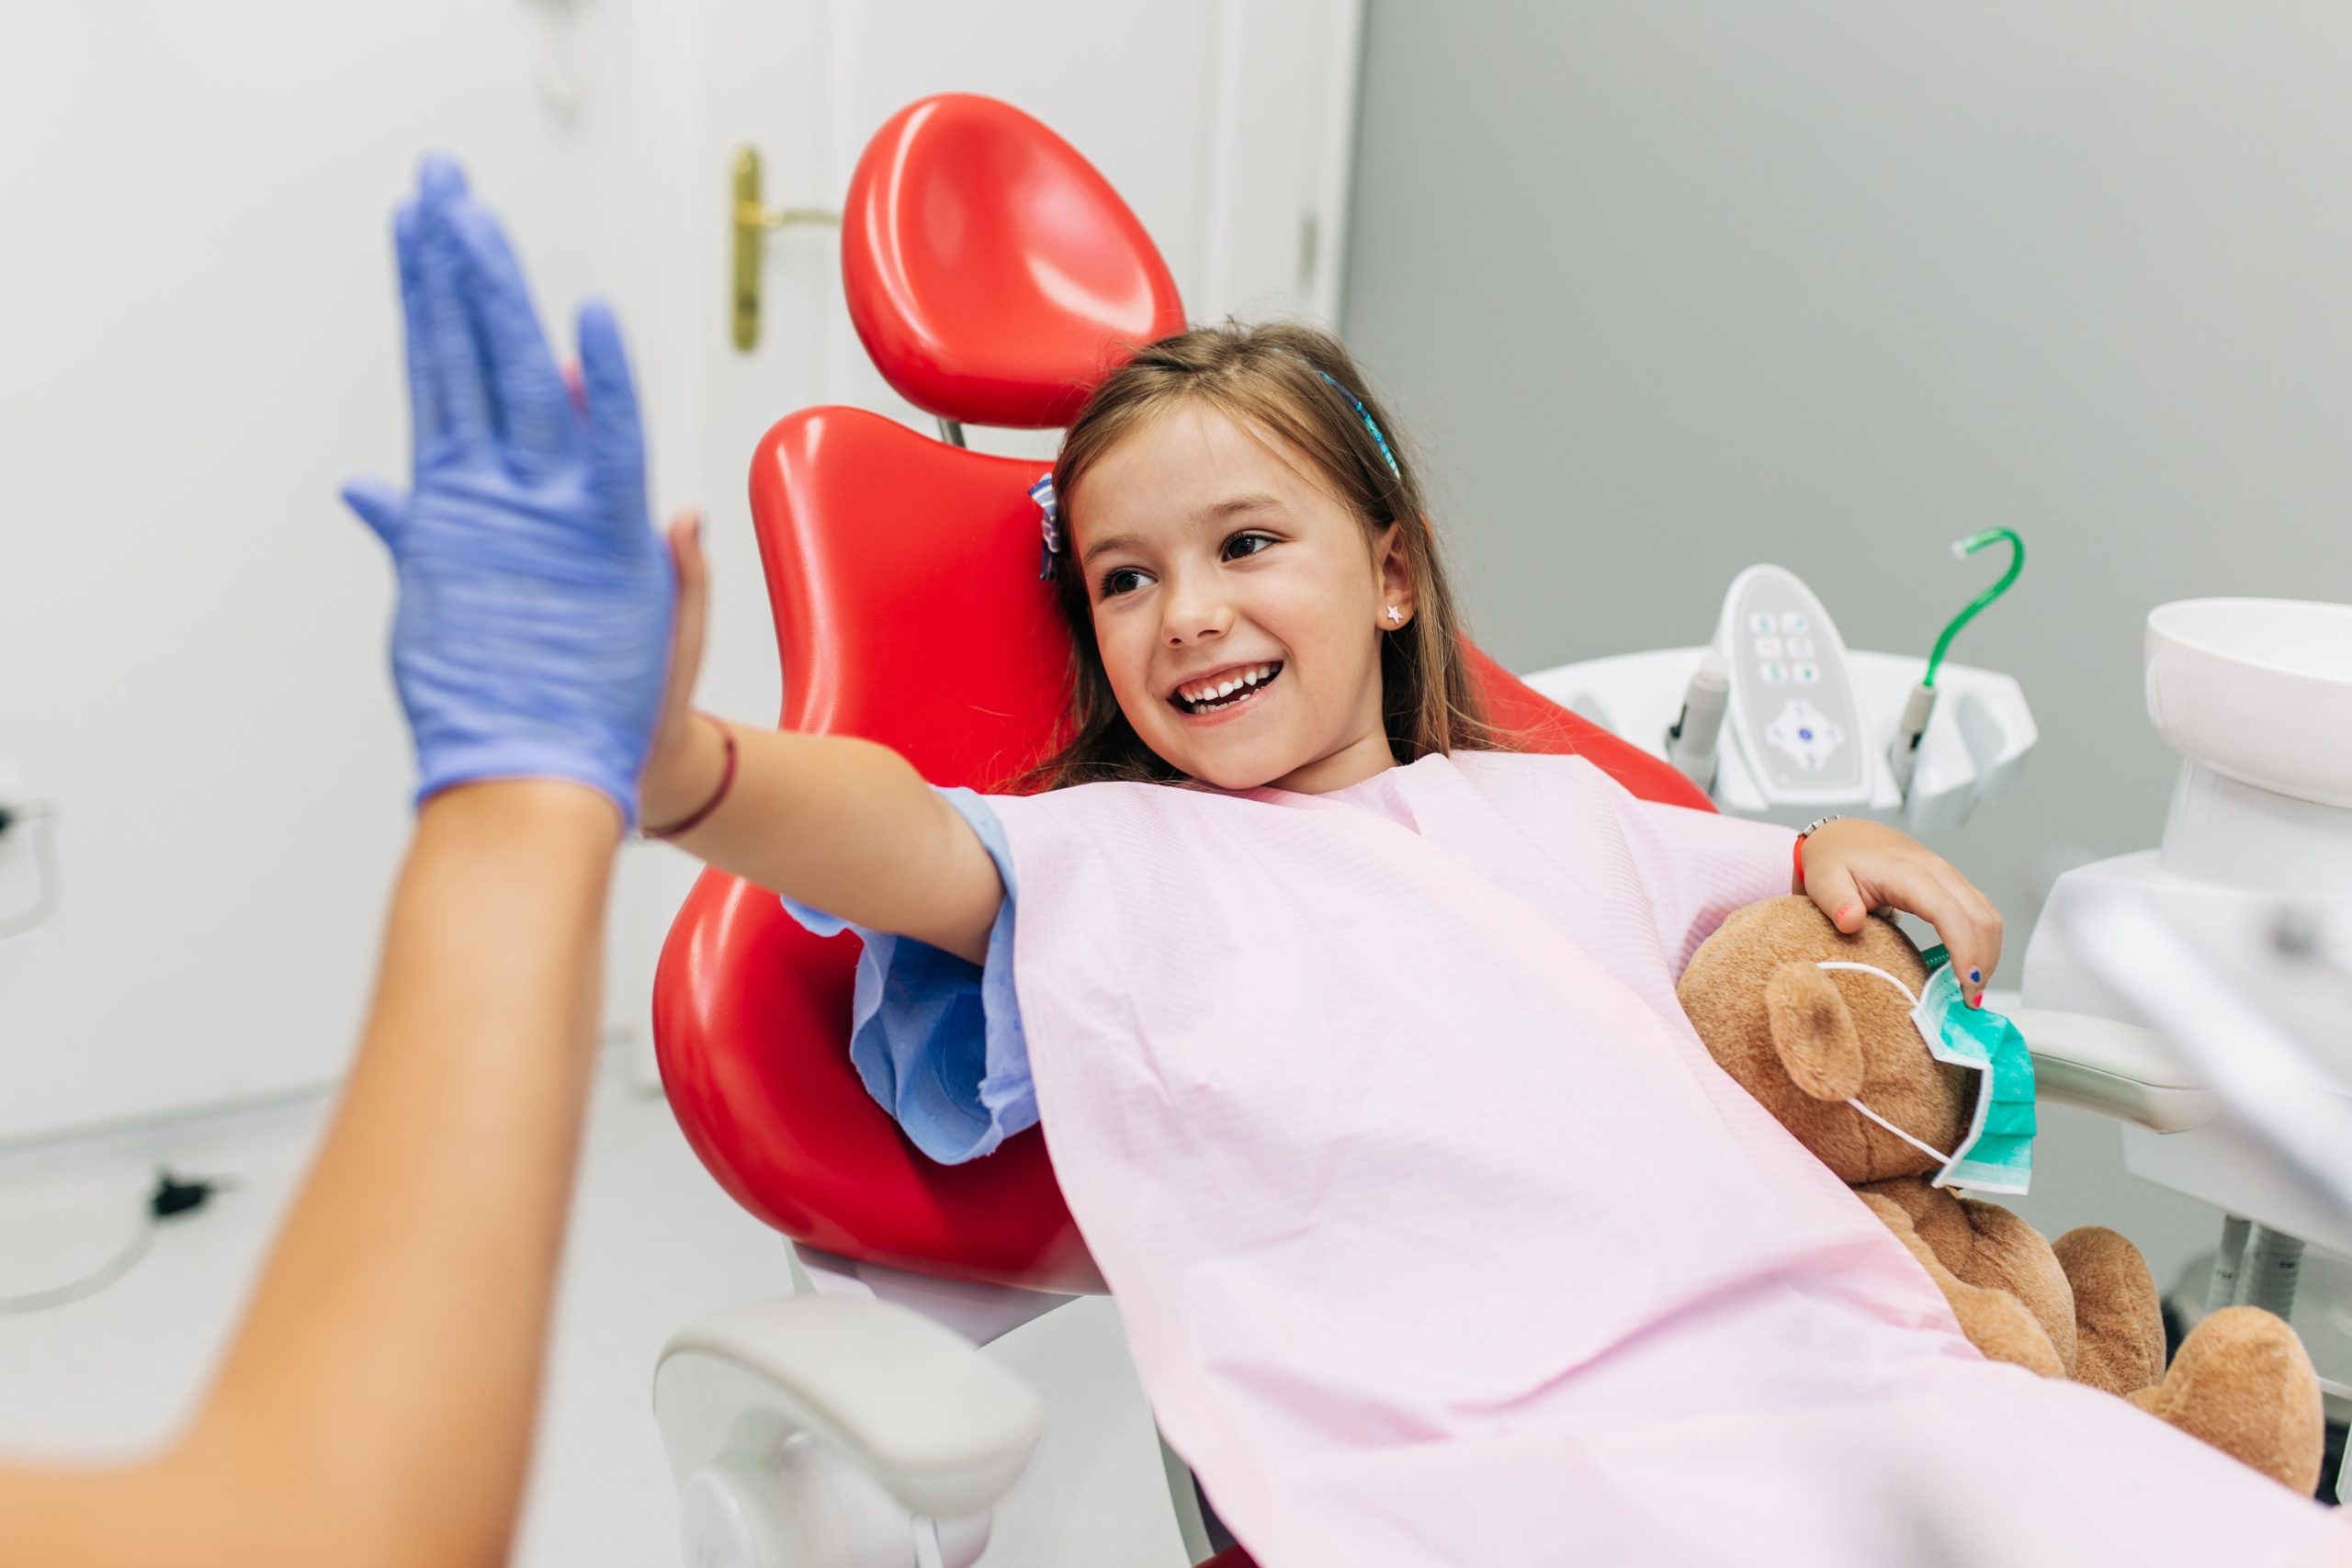 Grooming Activities Children That Creative in 2022 How Should I Take Care of My Child's Teeth?